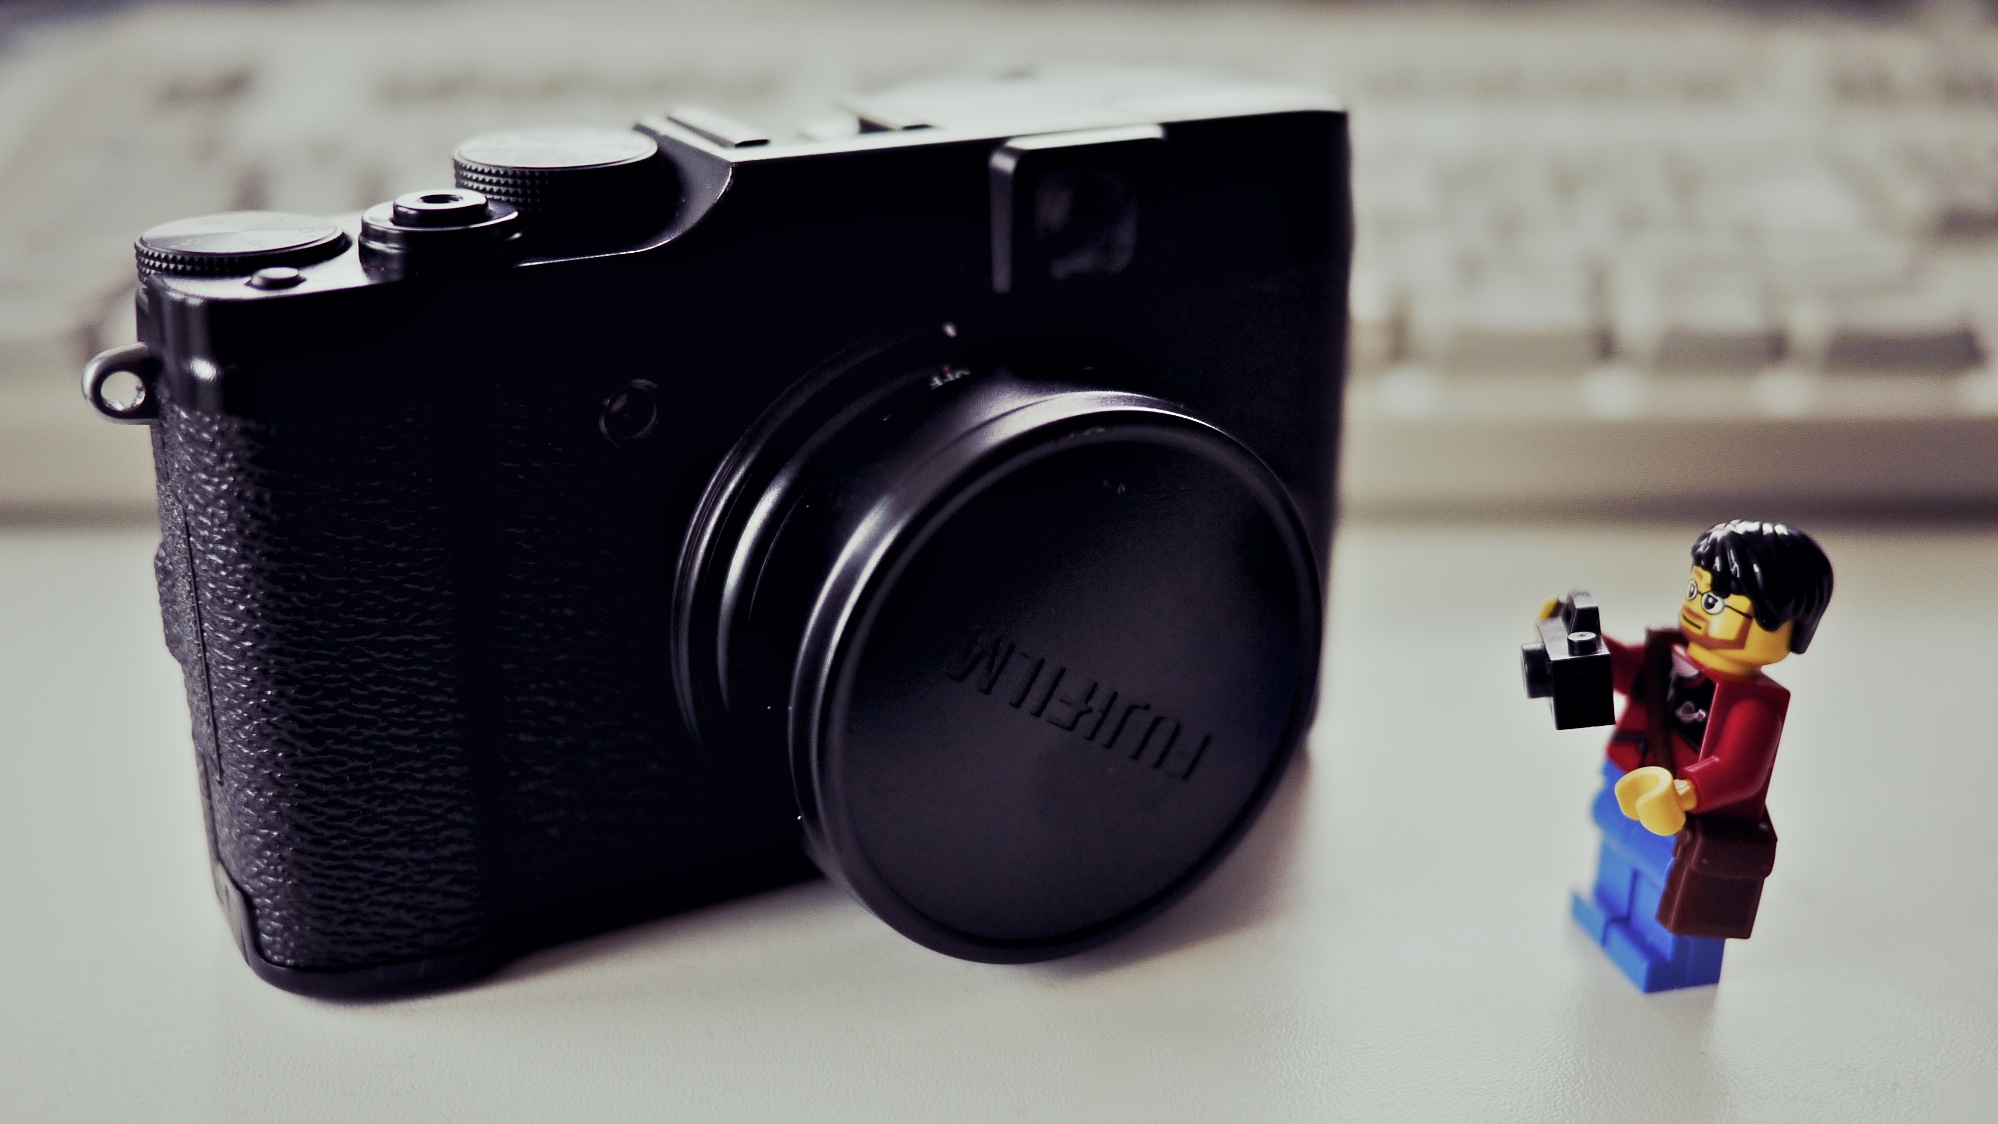 Hands on with the Fuji X-10 Thomas Fitzgerald